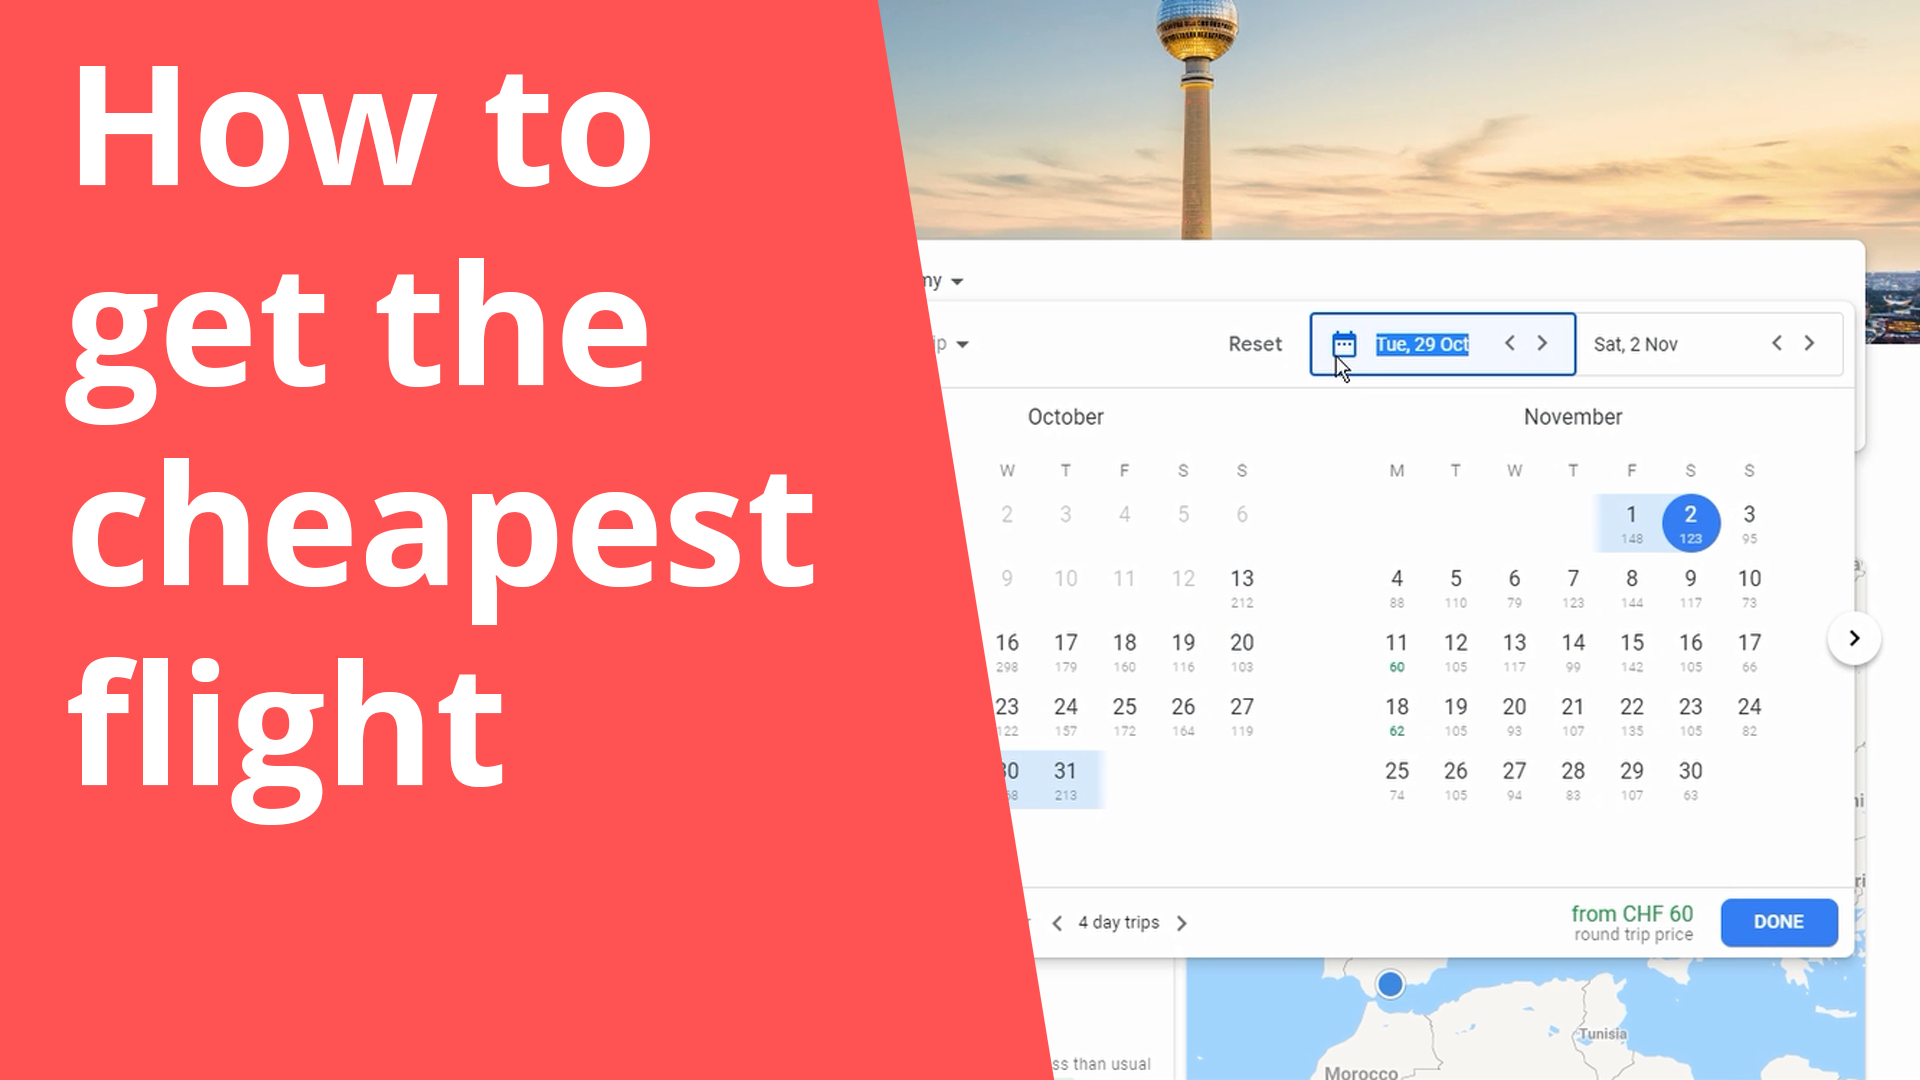 How to get the cheapest flight